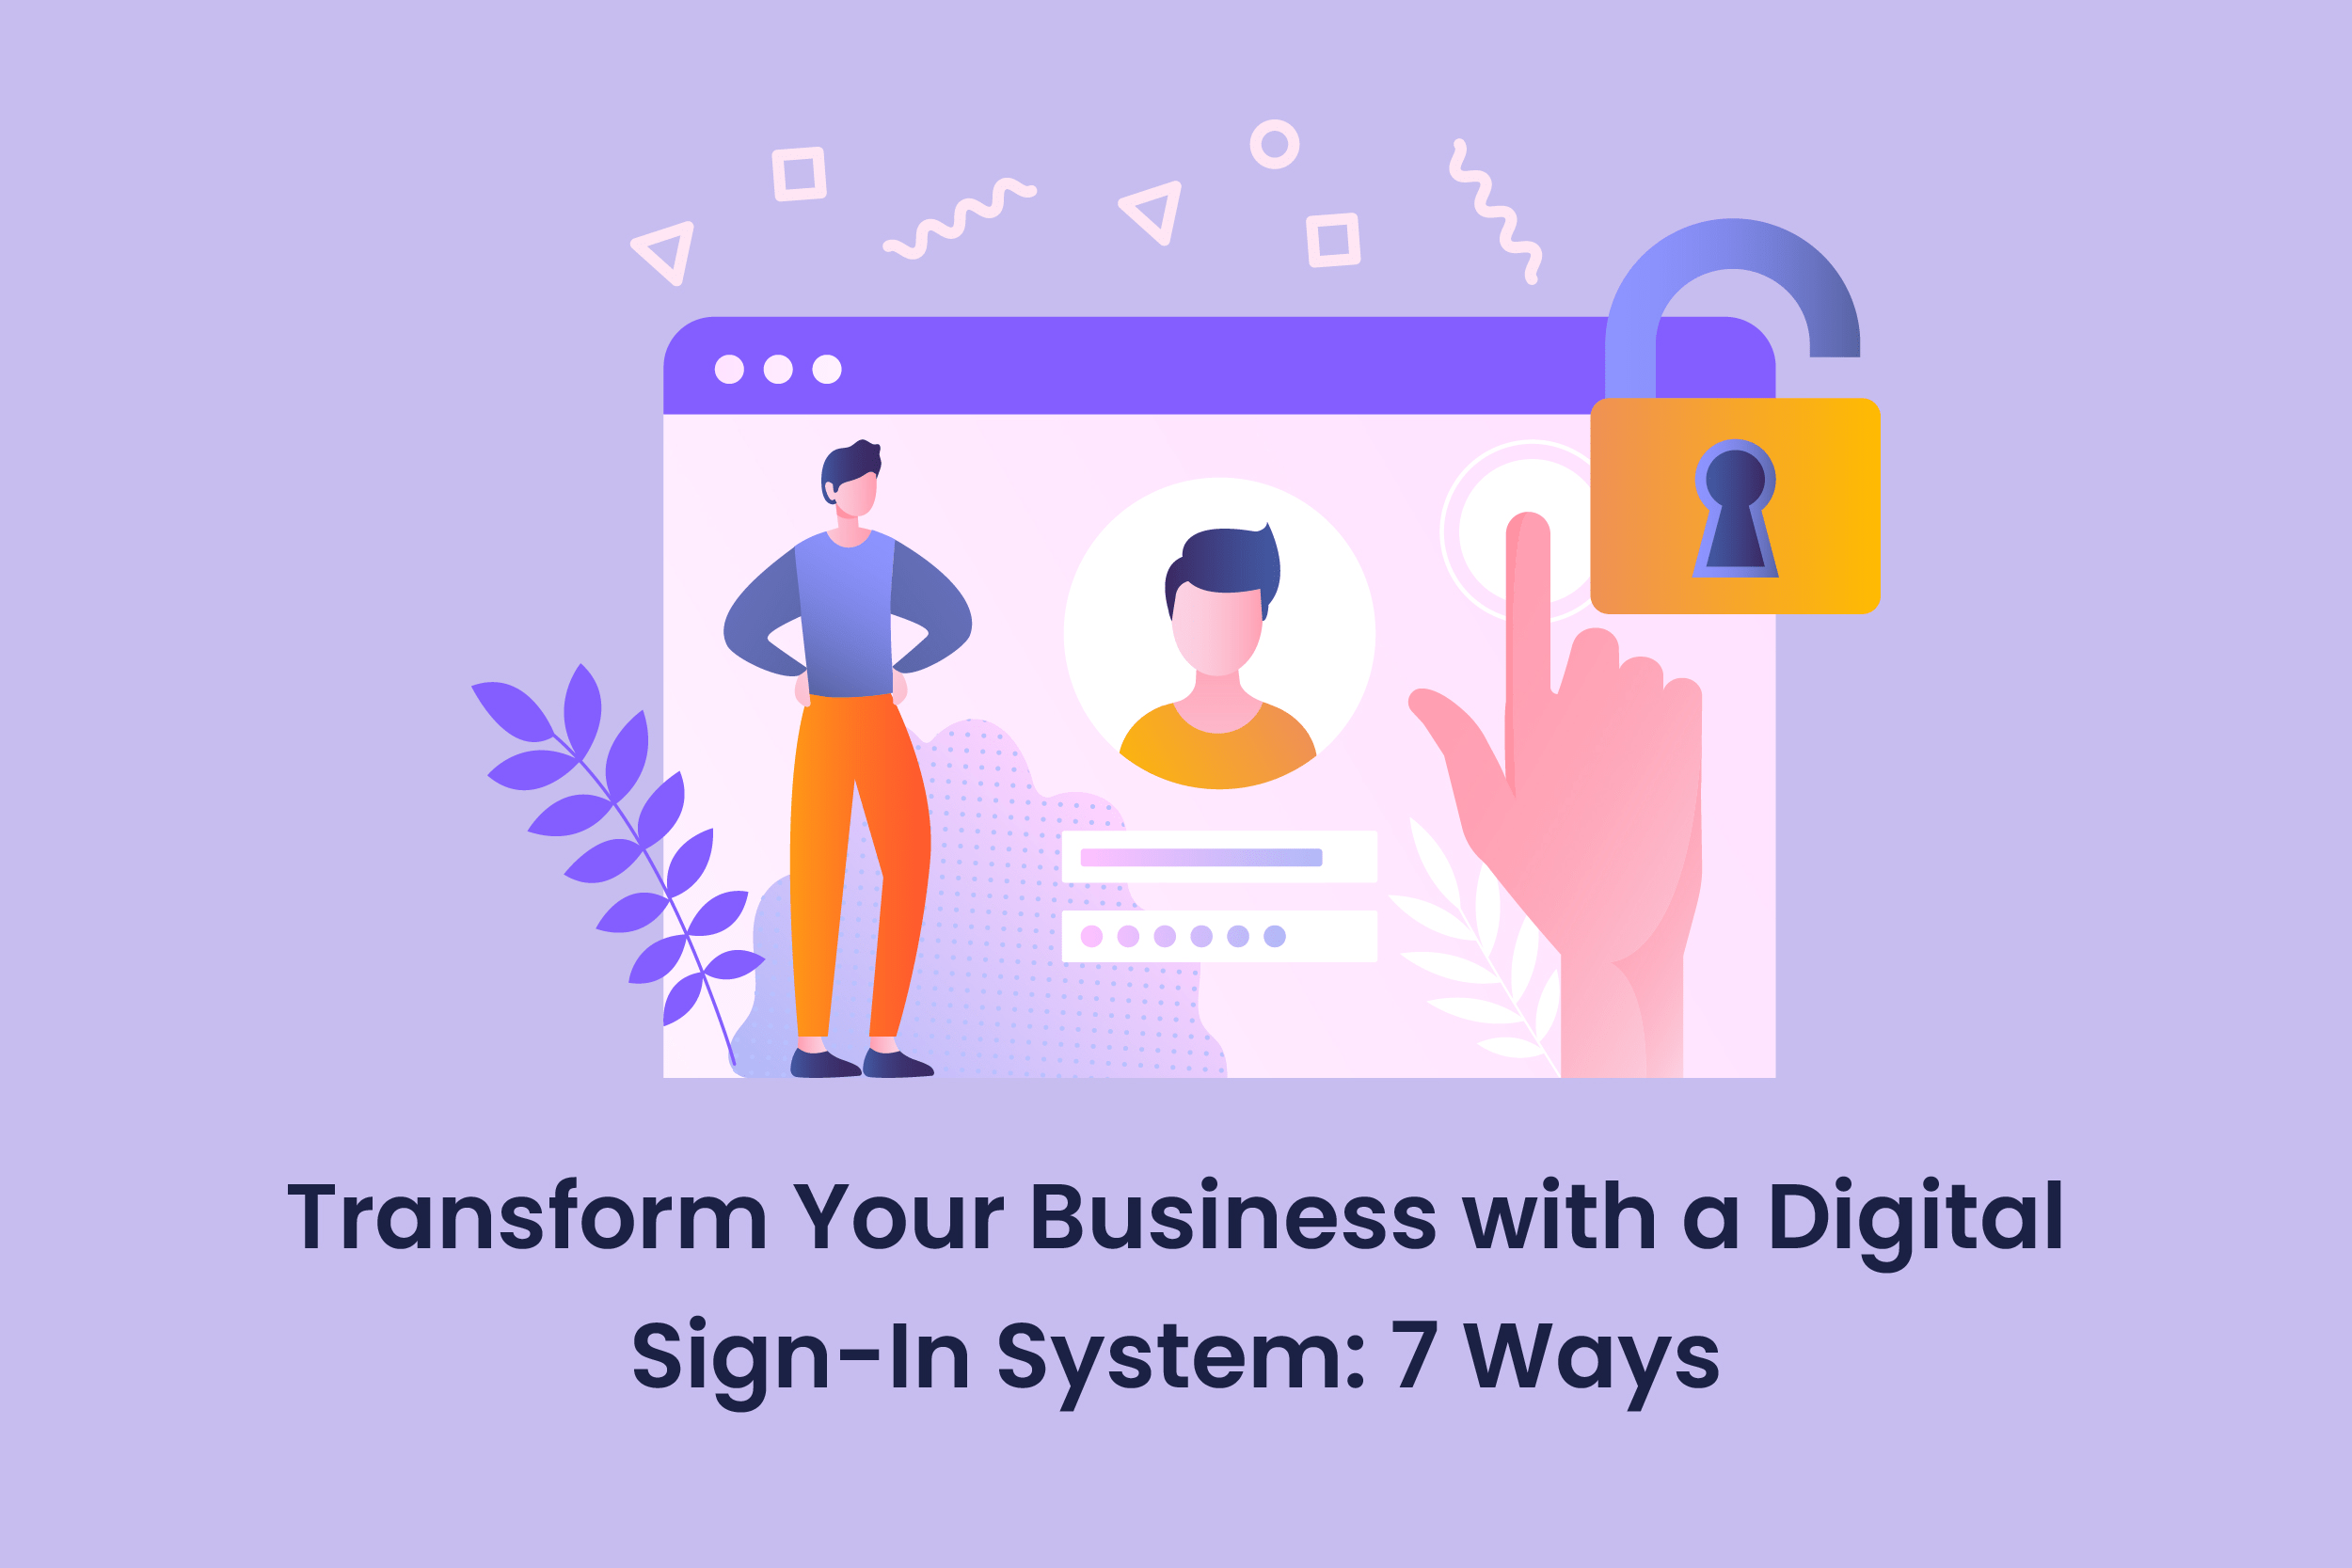 Transform Your Business with a Digital Sign-In System: 7 Ways